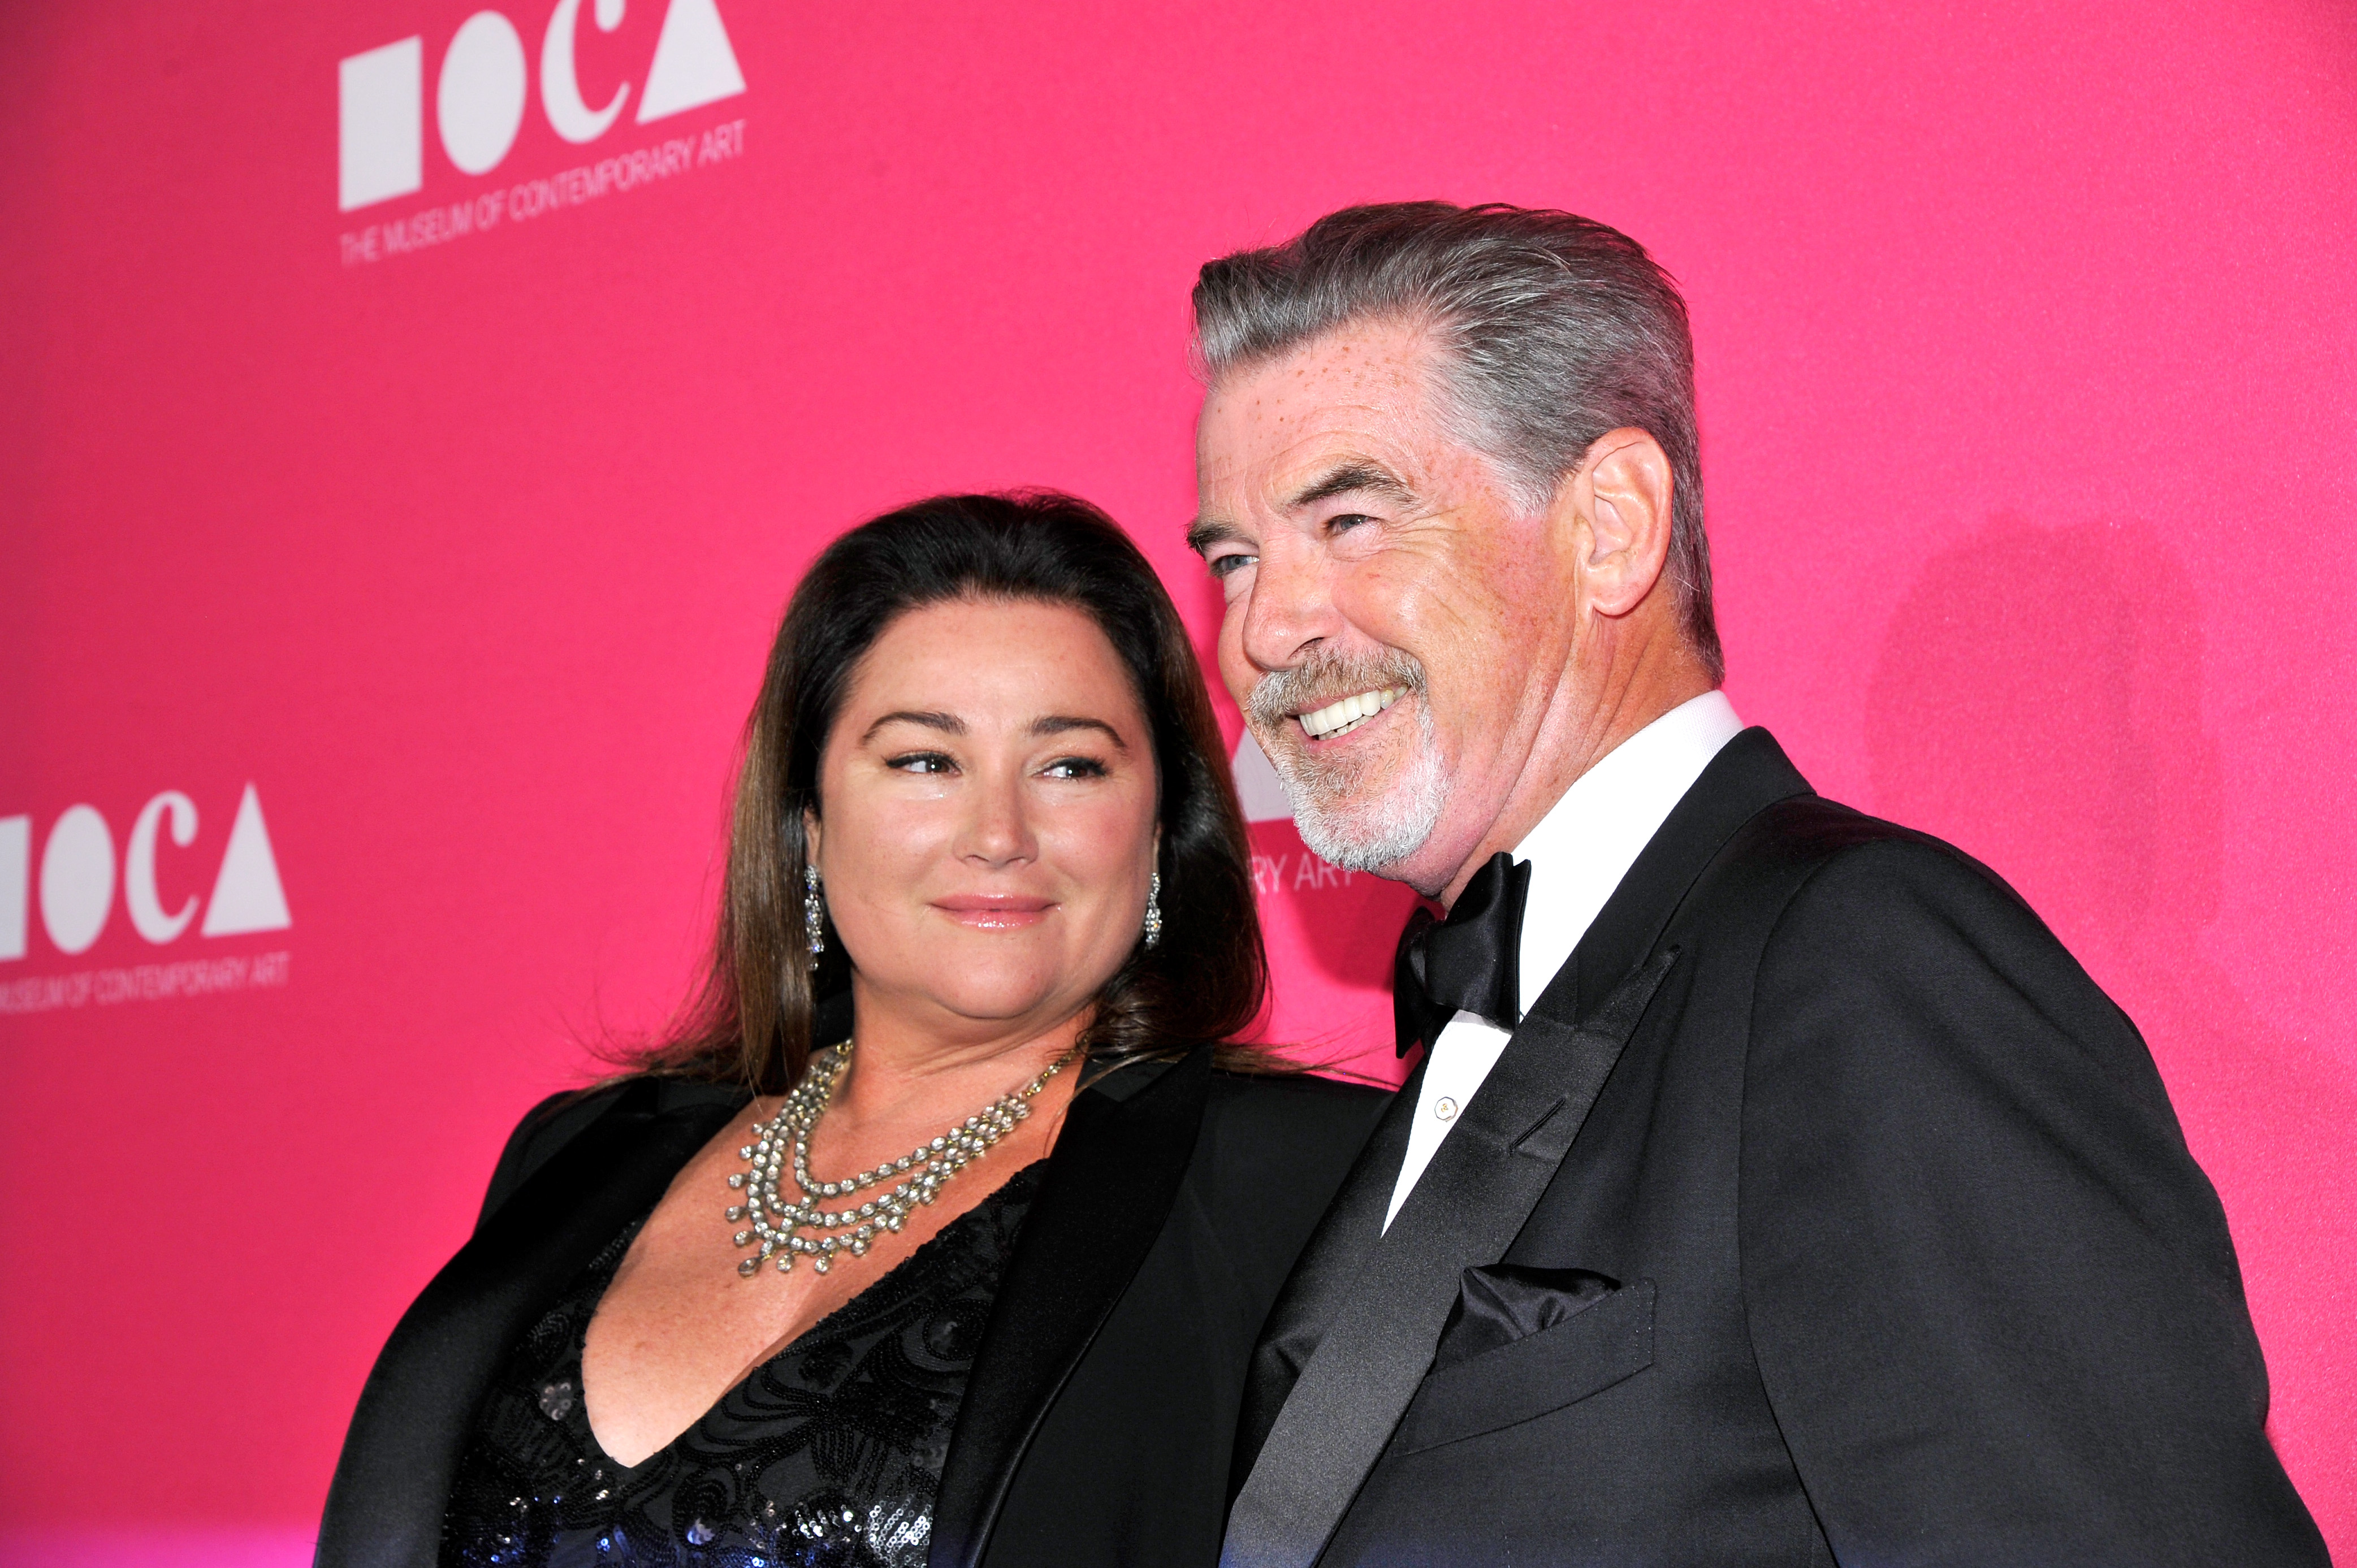 Keely Shaye Smith and Pierce Brosnan  in Los Angeles, California on April 29, 2017 | Source: Getty Images